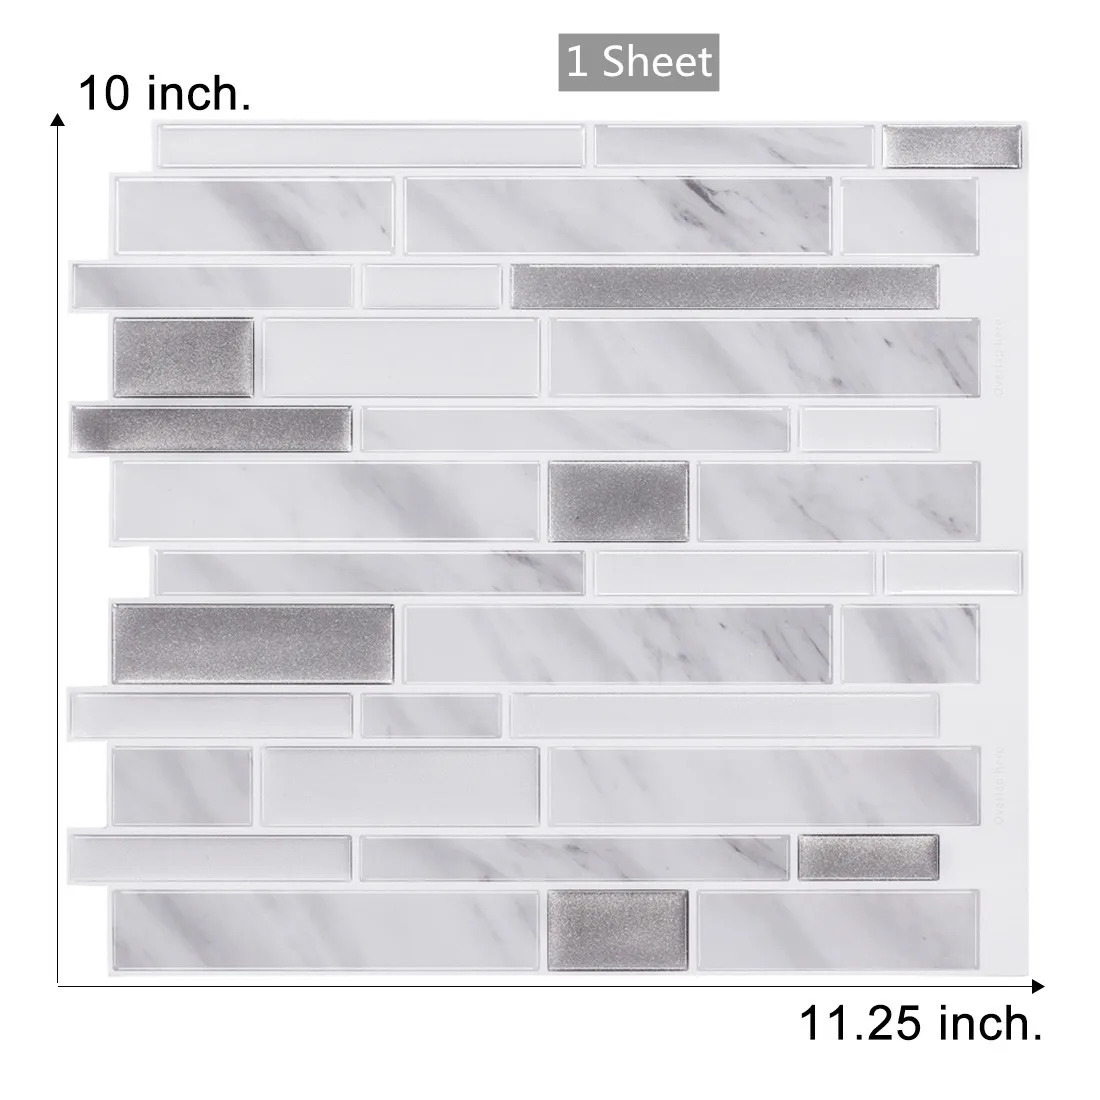 

Peel And Stick Wall Tile Mosaic Backsplash Kitchen Wallpaper Home Decoration Wtone Wall Tiles With Epacket Free Shipping-1pcs